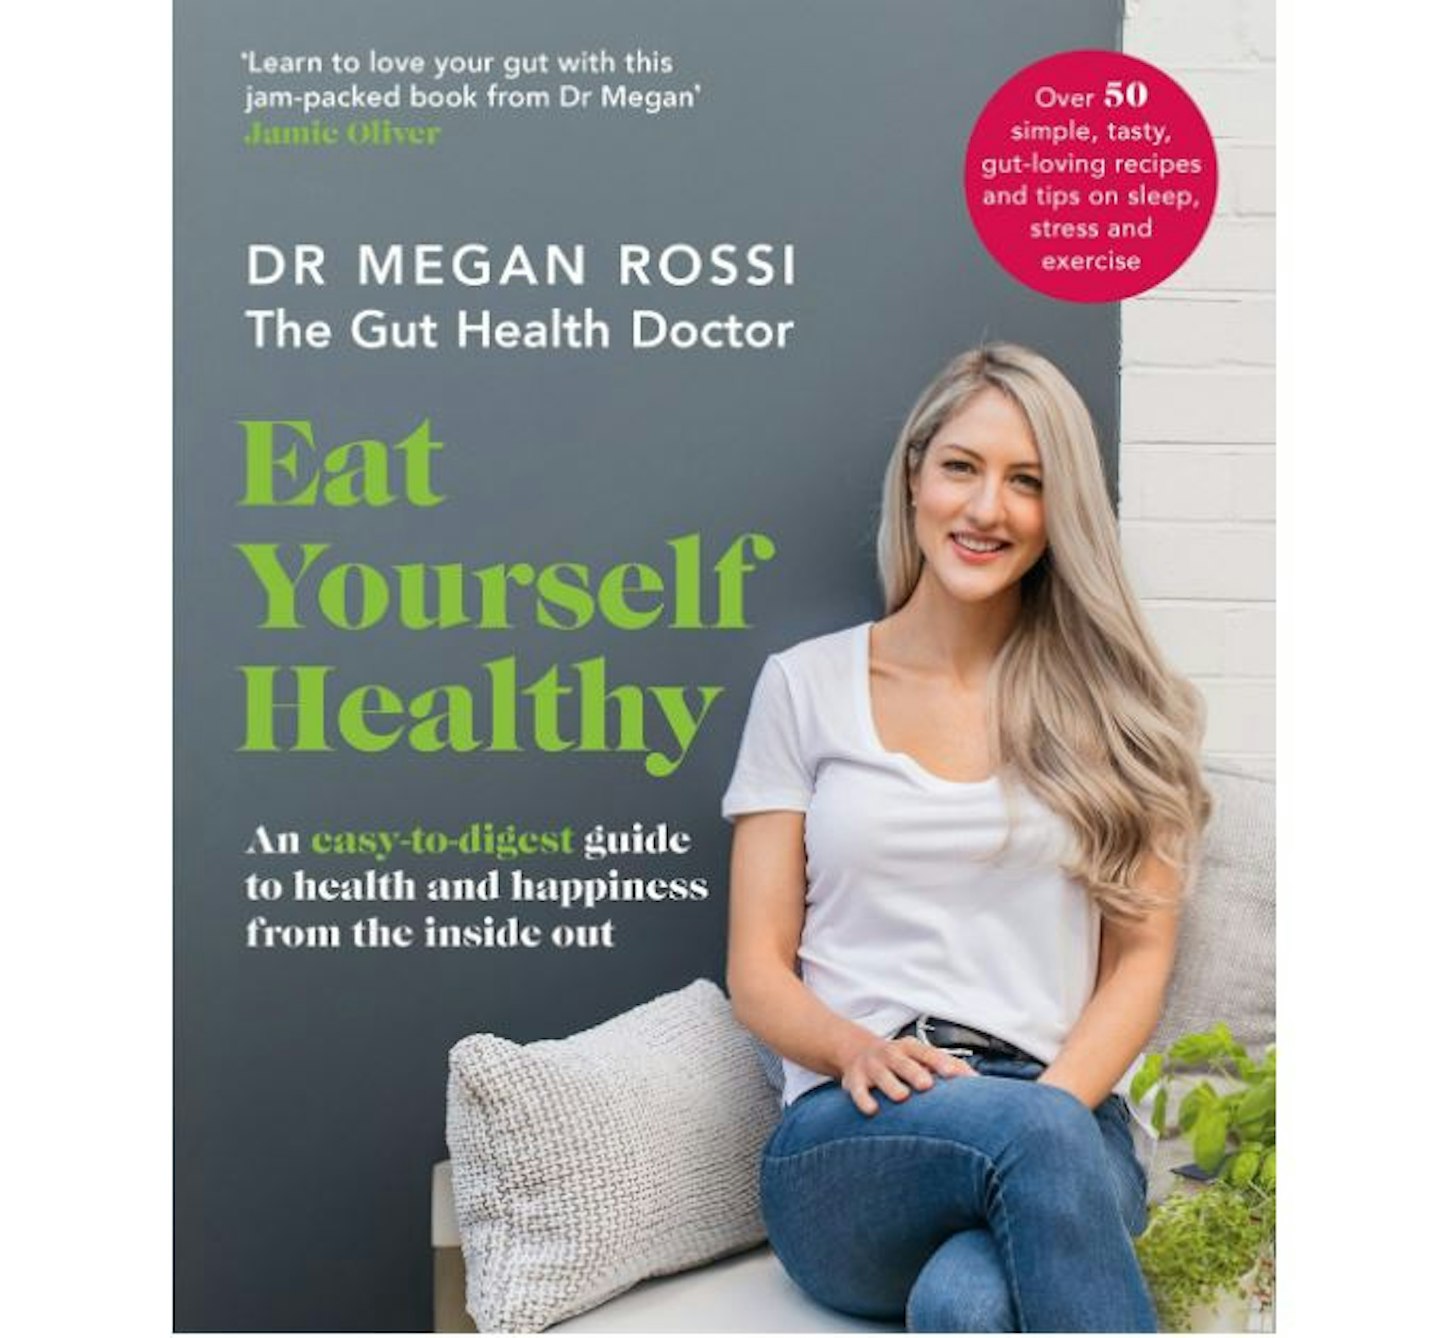 Eat Yourself Healthy by Dr. Megan Rossi